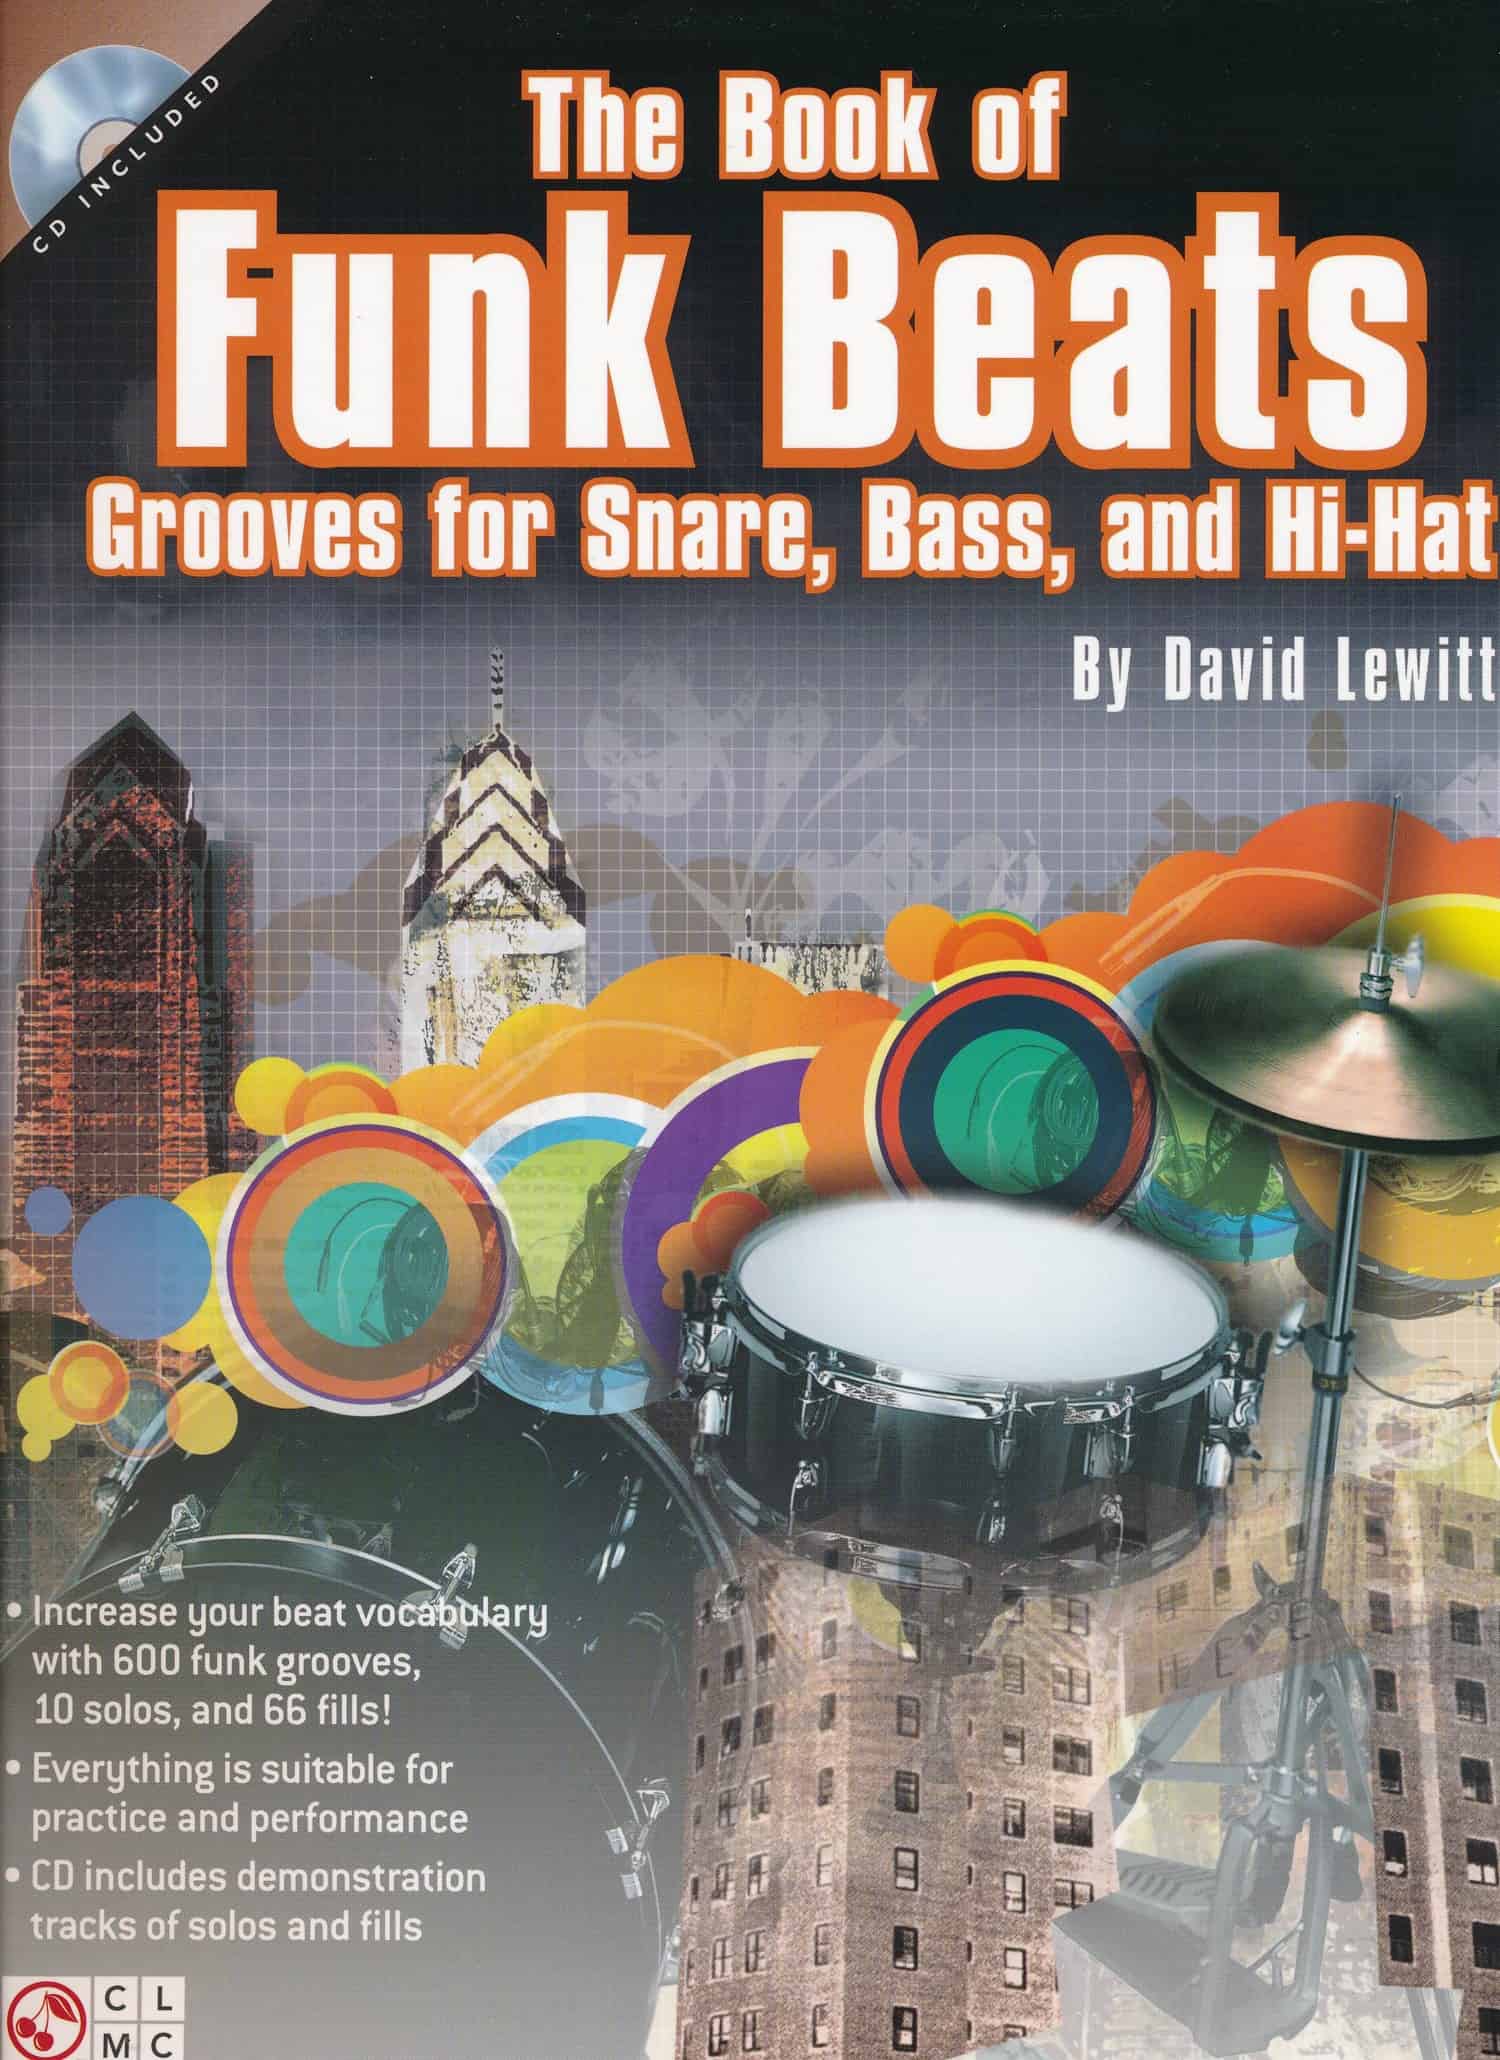 The Book of Funk Beats - Grooves for Snare, Bass, and Hi-hat